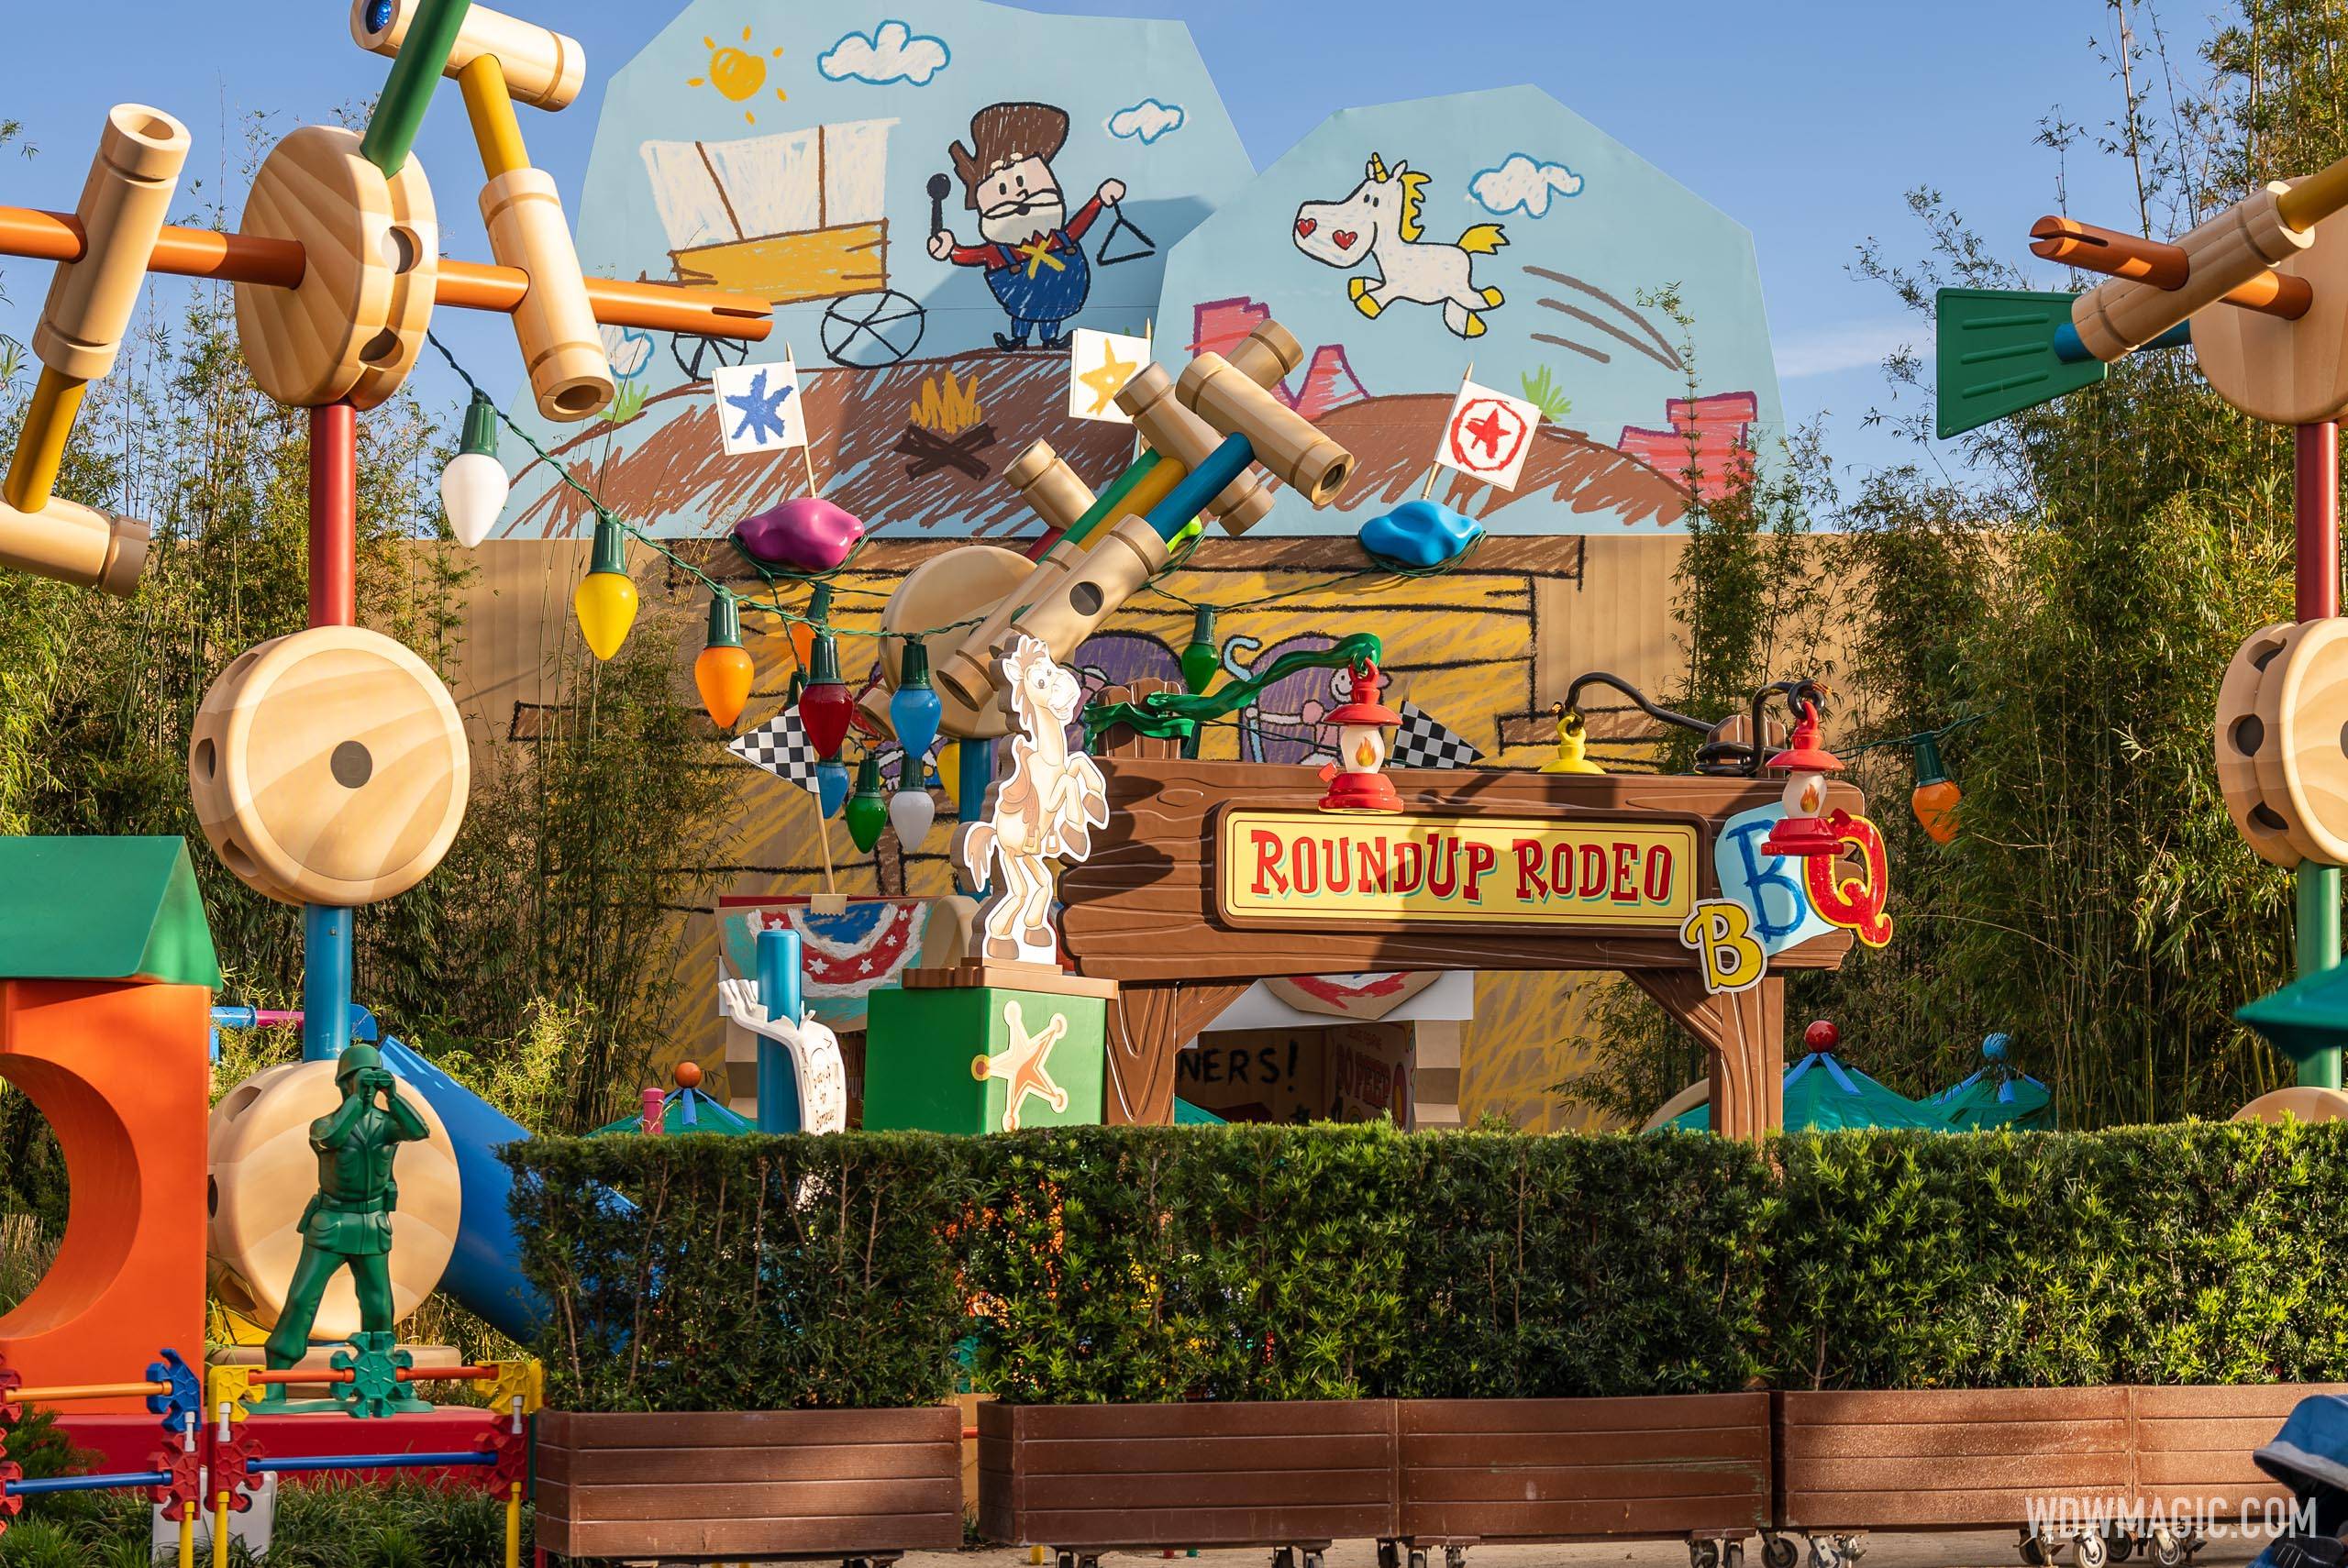 Marquee signage uncovered at Roundup Rodeo BBQ in Toy Story Land at Disney's Hollywood Studios